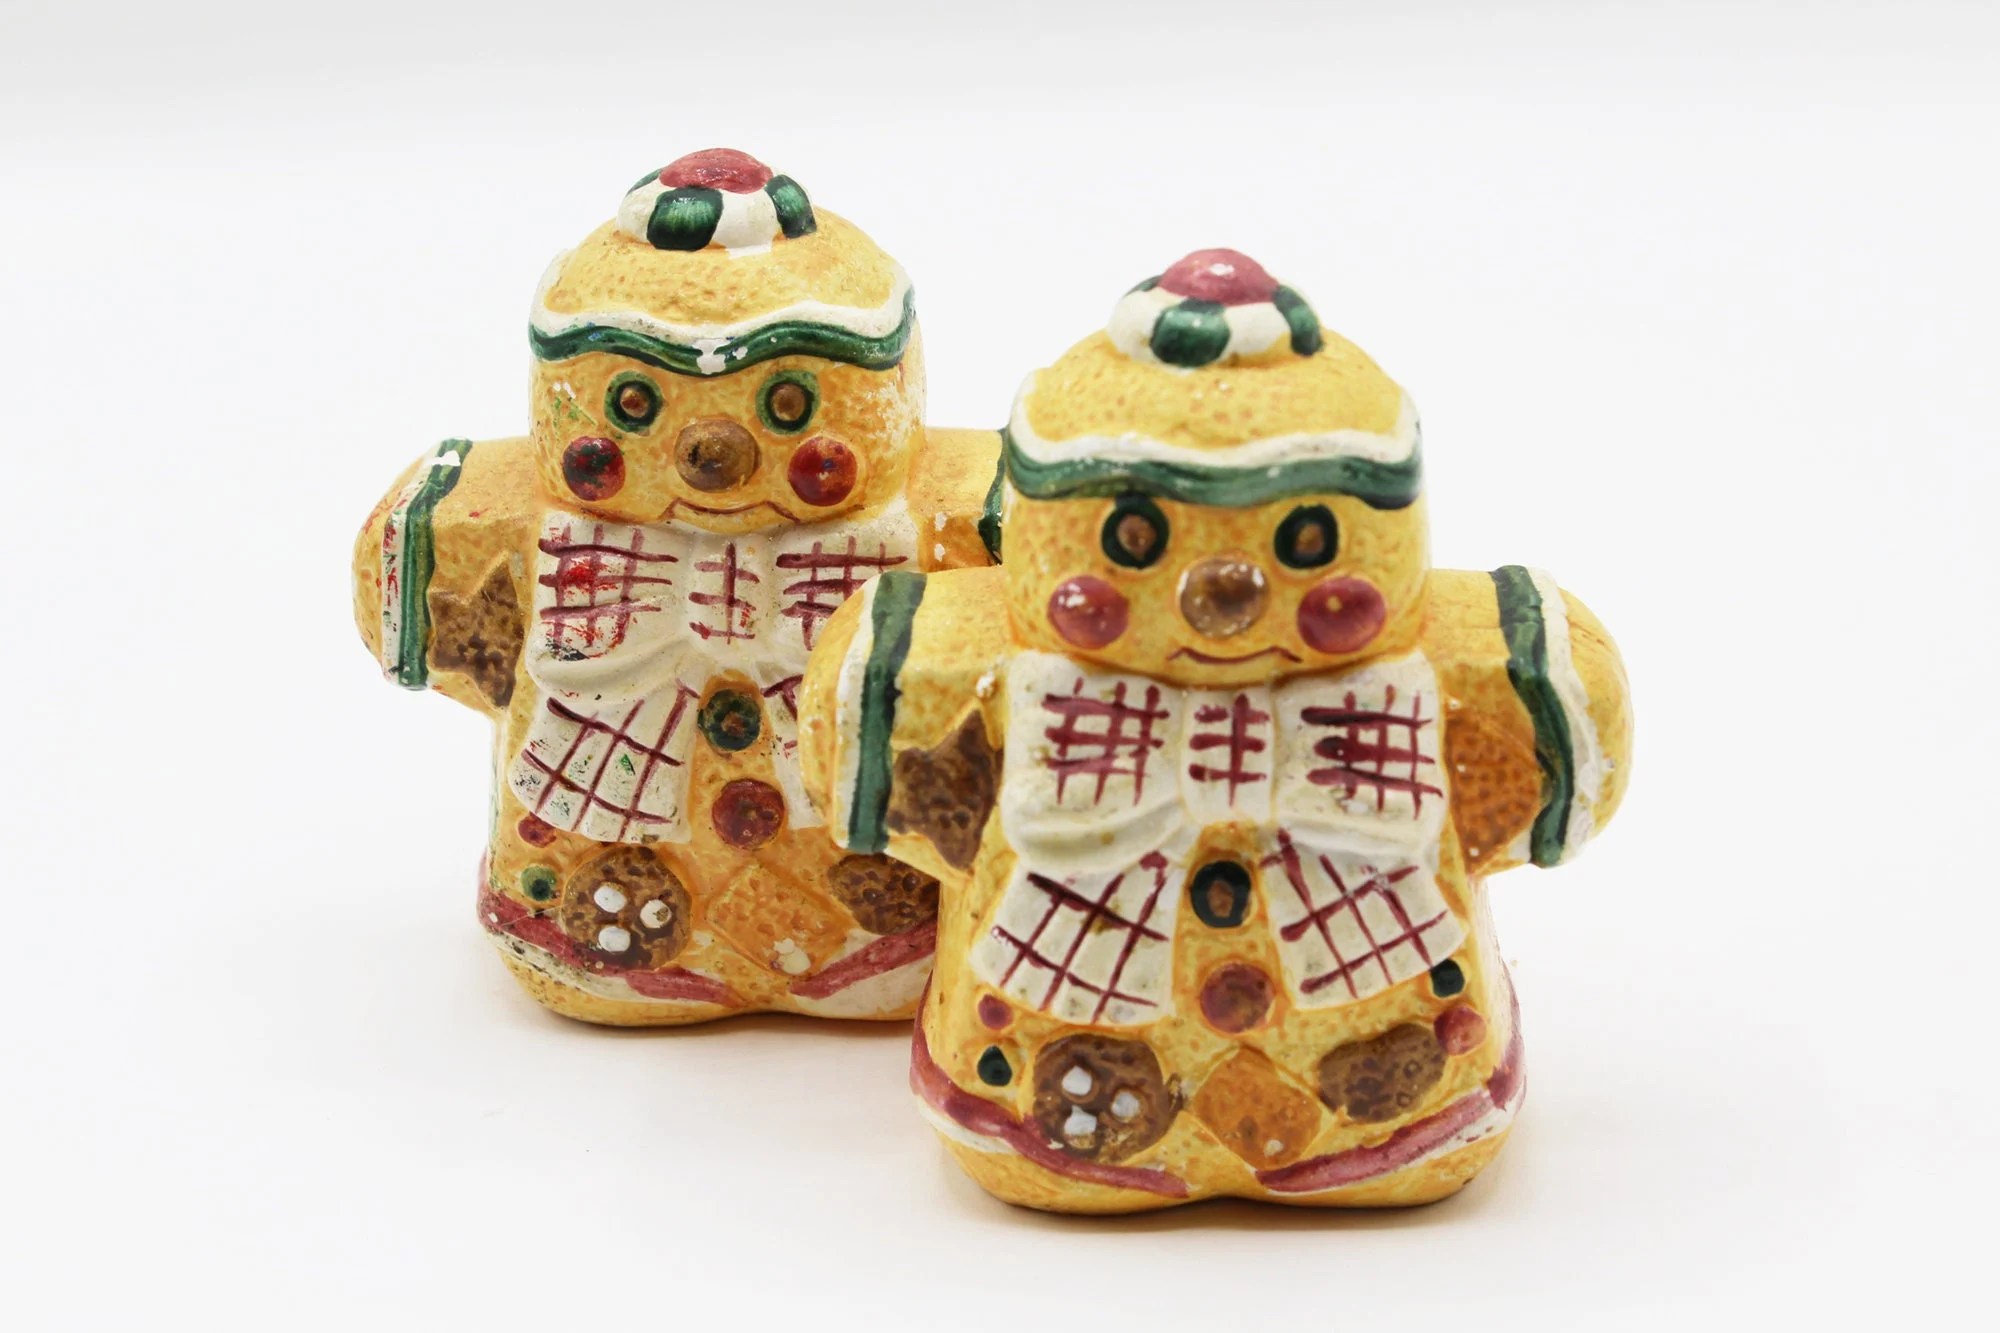 Hand Painted 1990s Christmas Gingerbread Couple Salt and Pepper Shakers - Vintage, Y2K, Grandma, S&P, Cottage, Farmhouse, Christmas, Holiday